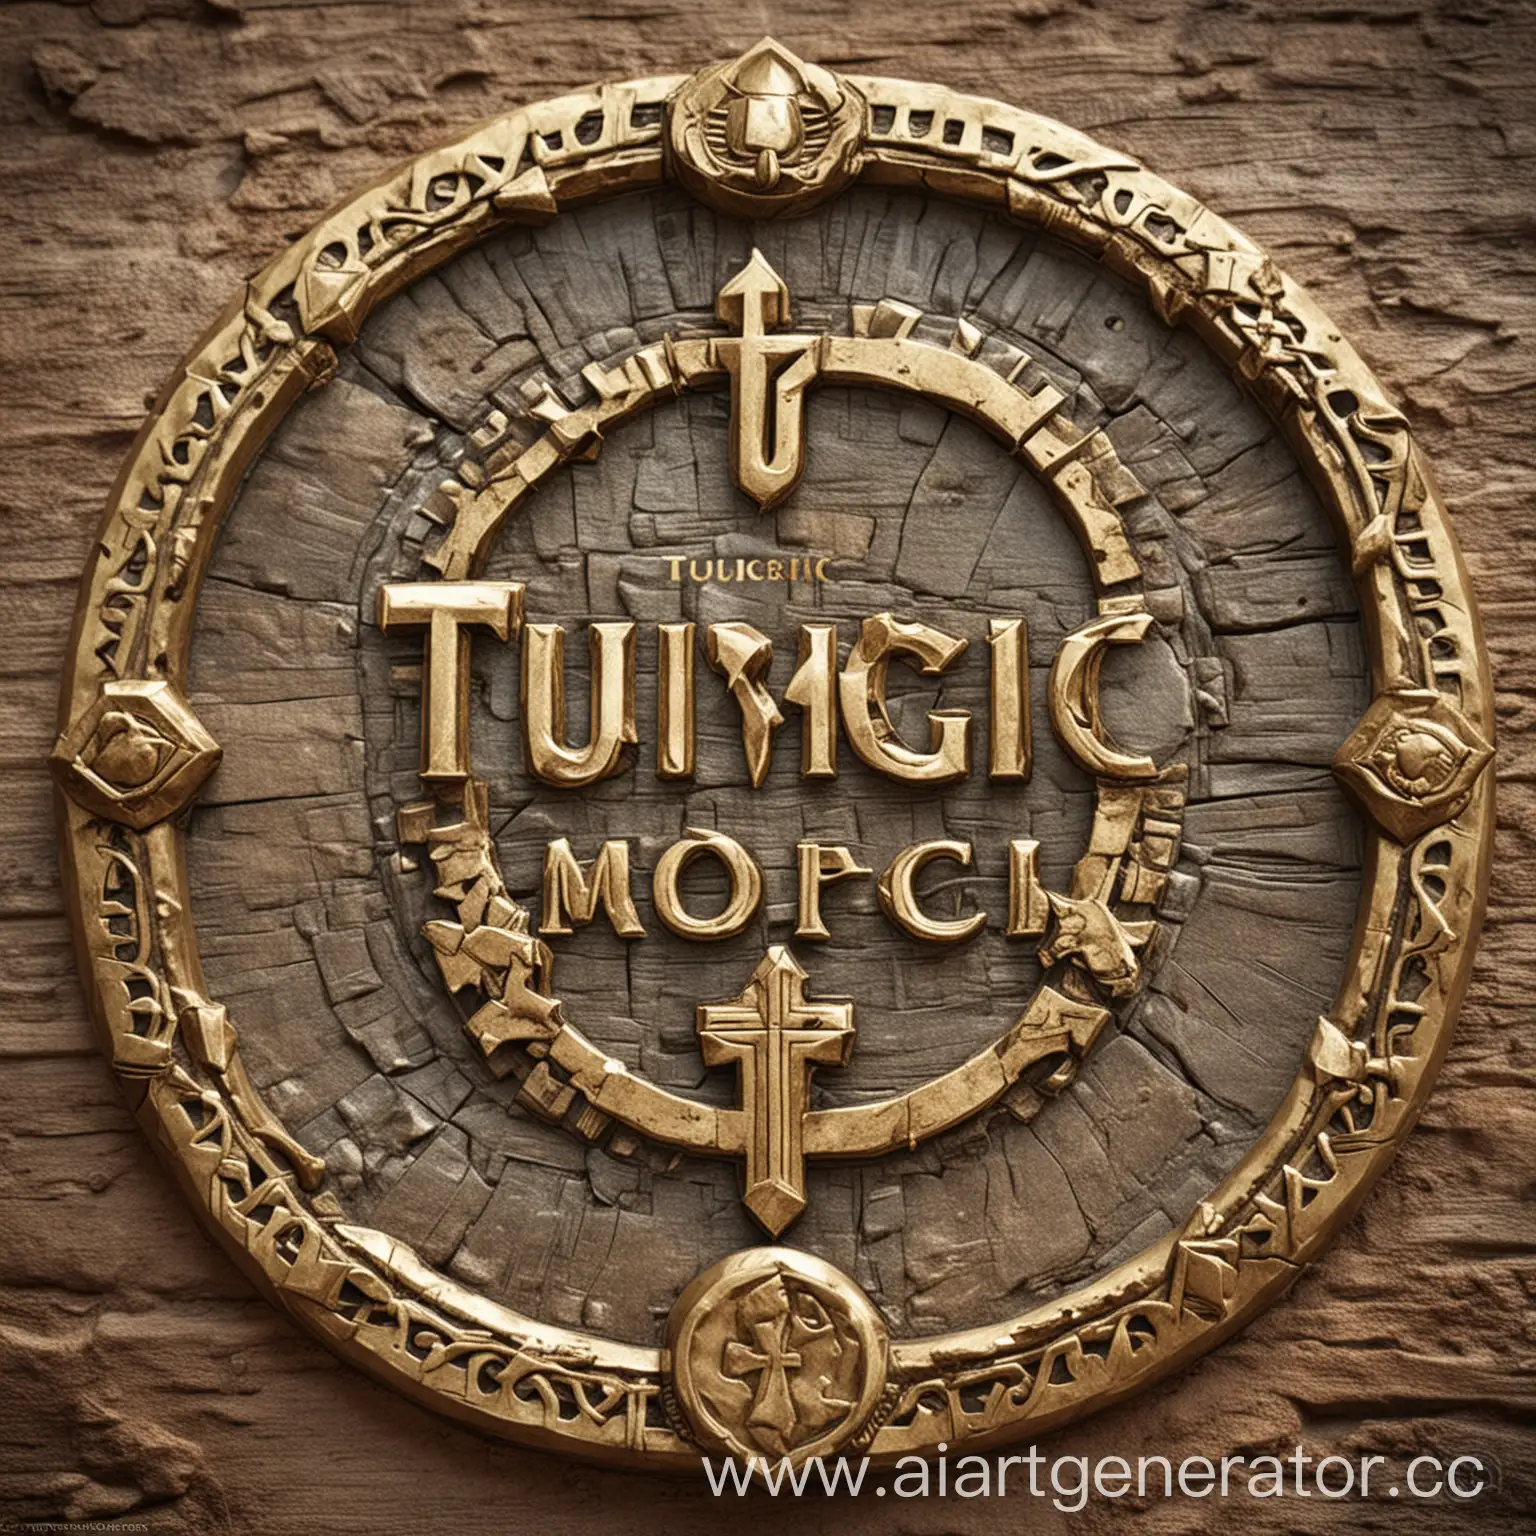 Enchanted-Kingdom-of-Tugric-A-Digital-Adventure-of-Friendship-and-Cooperation